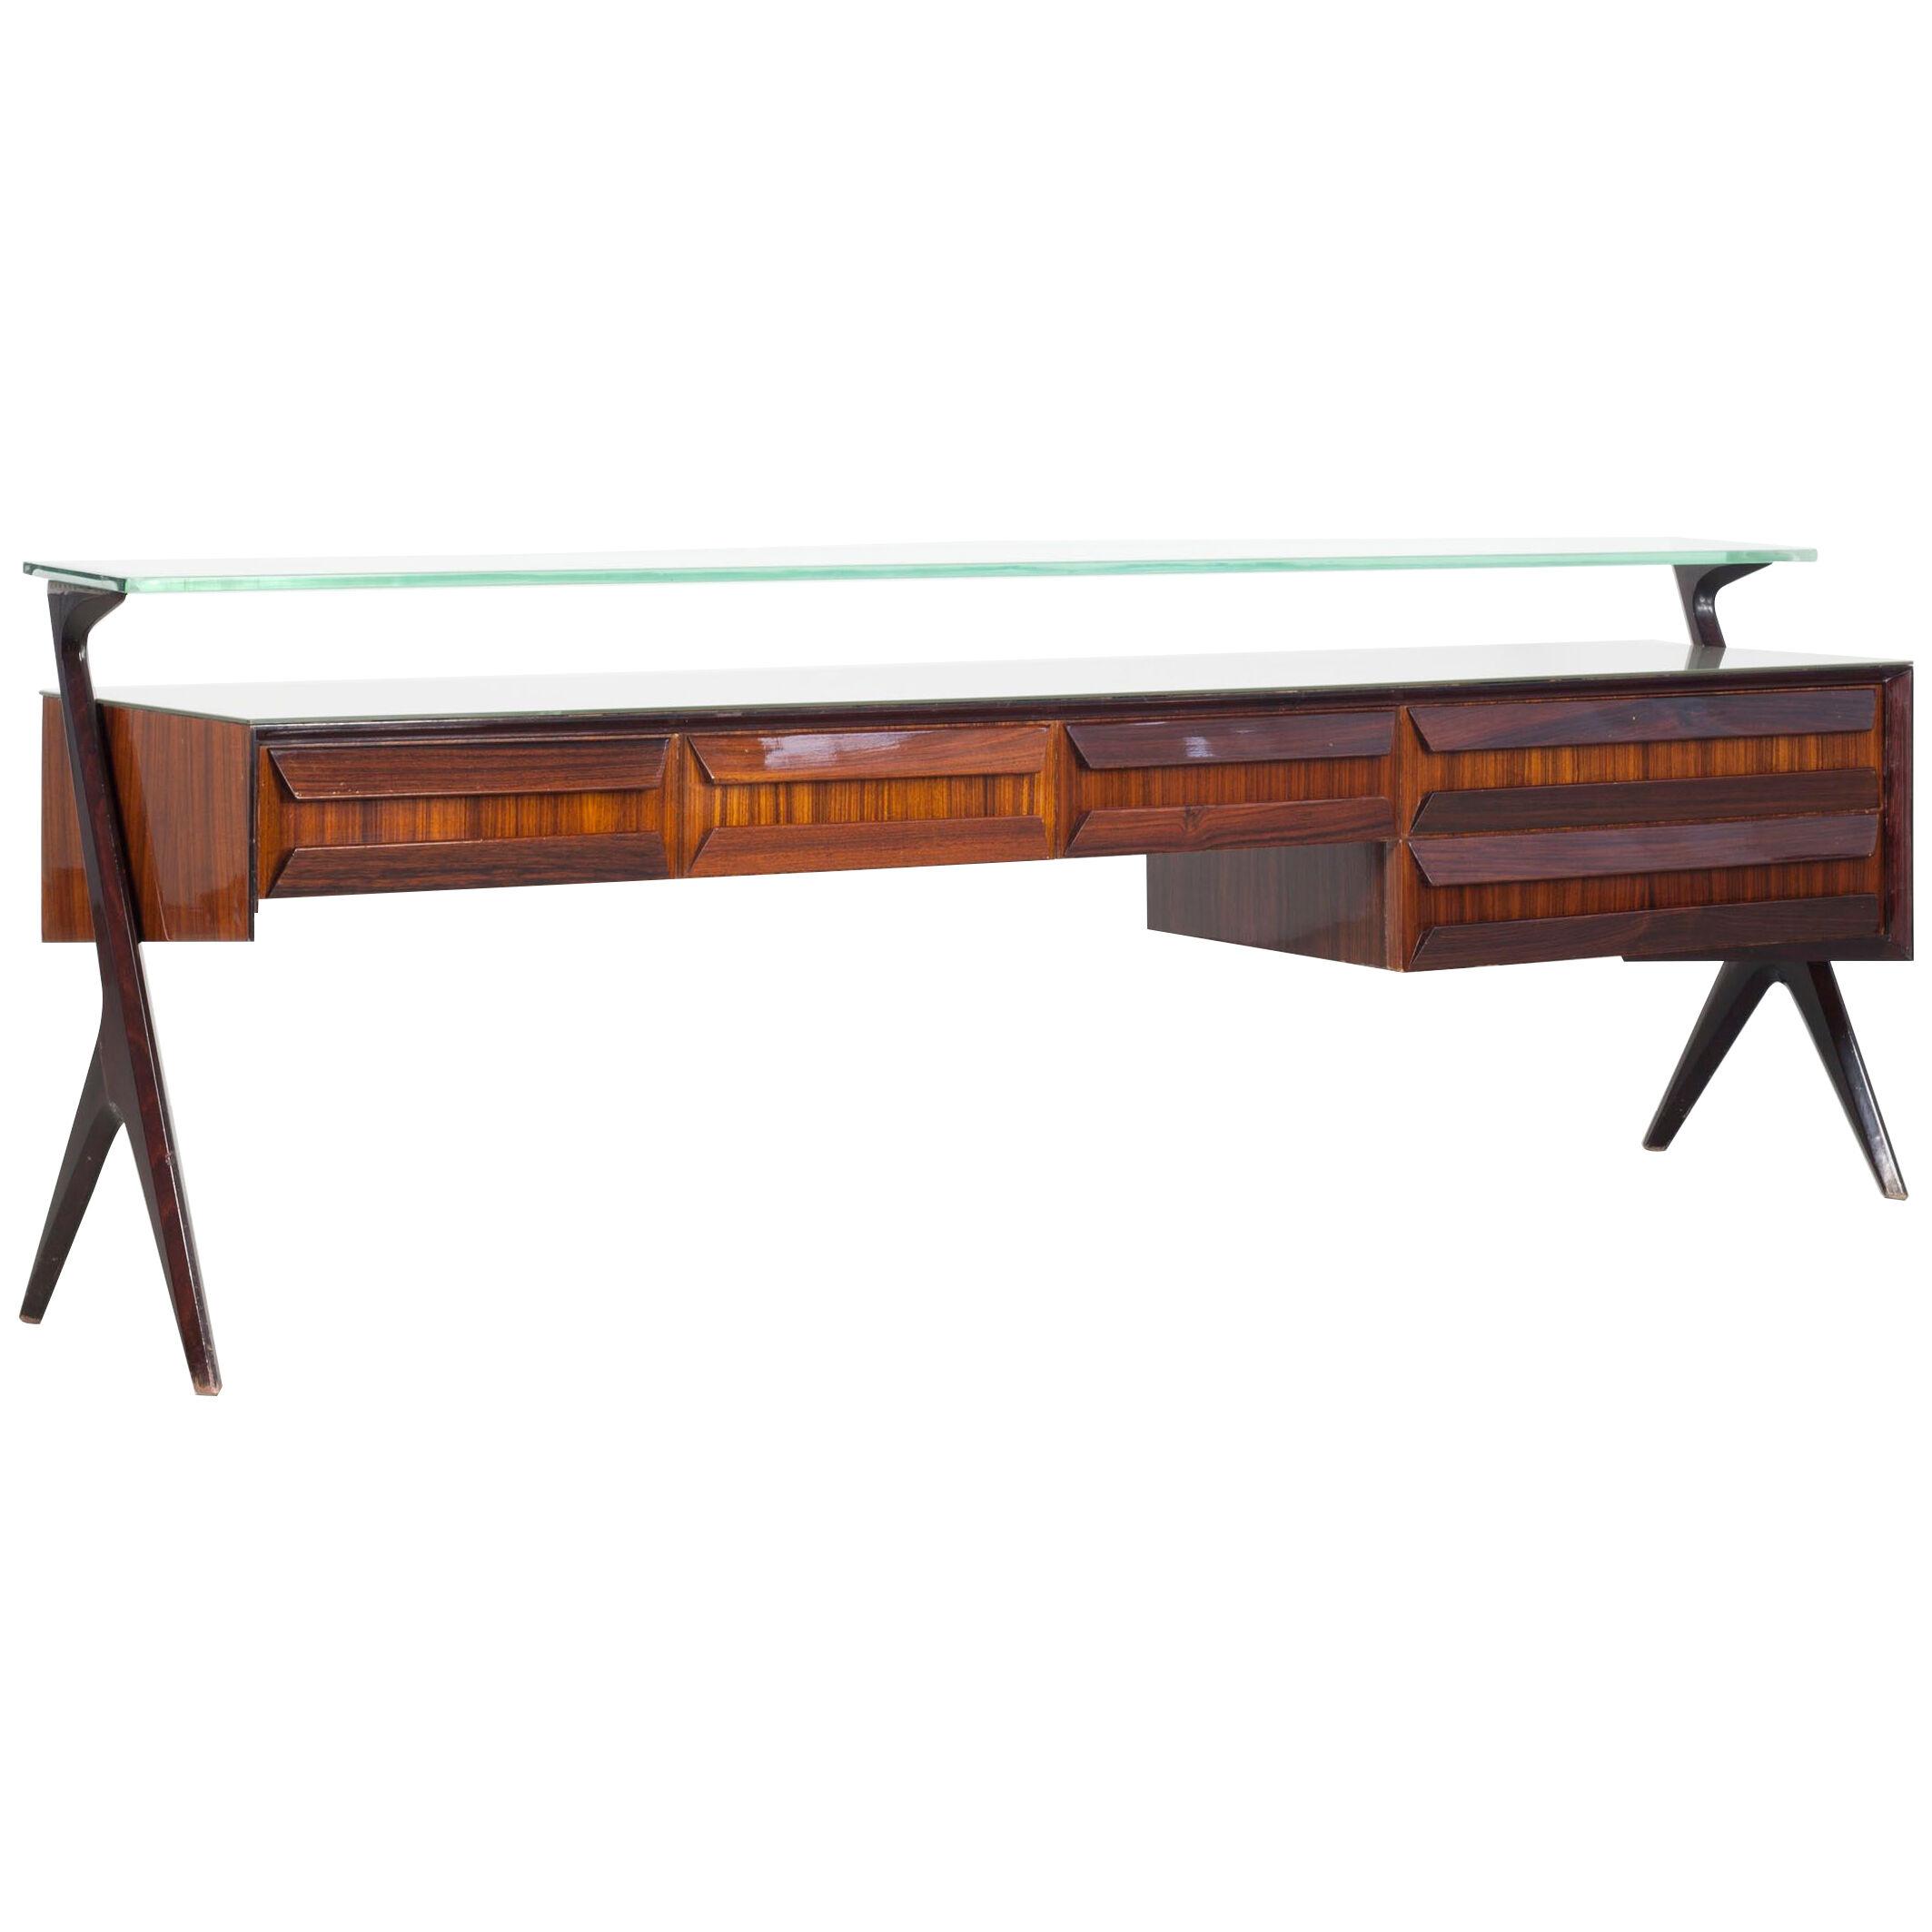 Italian Palisander Satined Glass Sideboard, Manufactured by Dassi Lissone, 1953